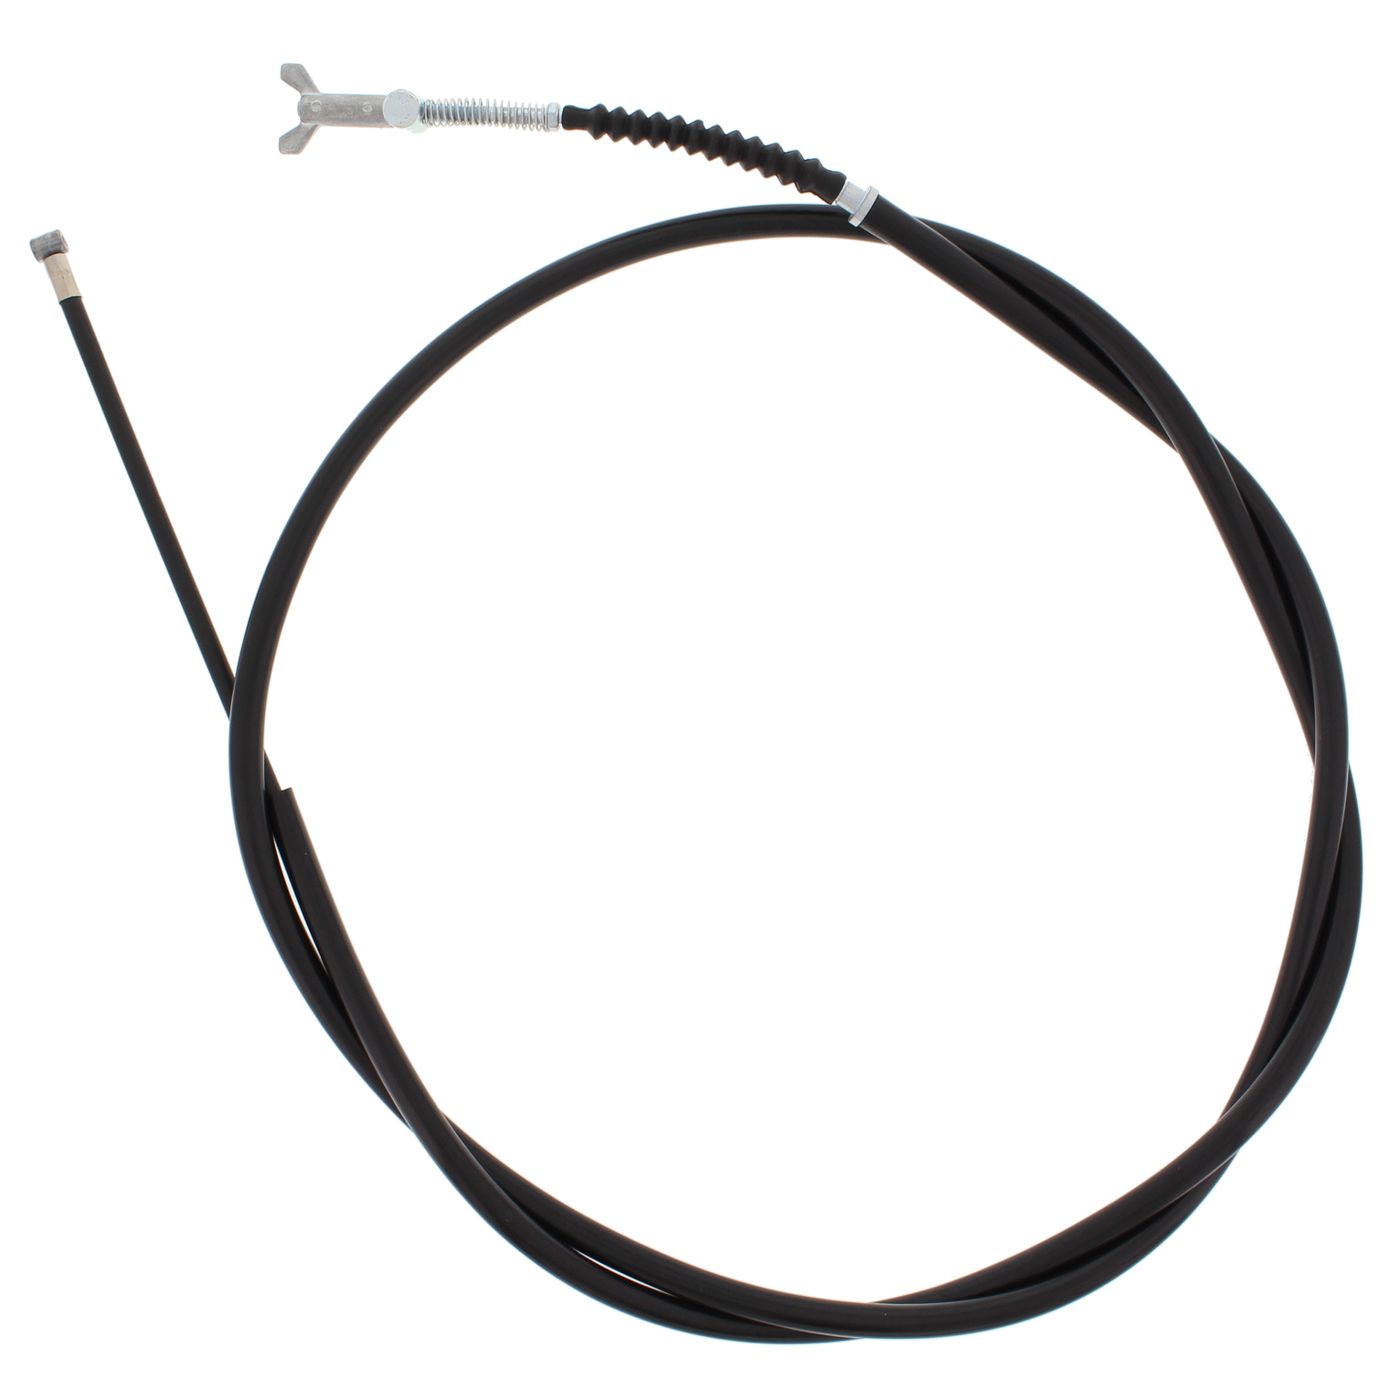 Wrp Brake Cables - WRP454036 image